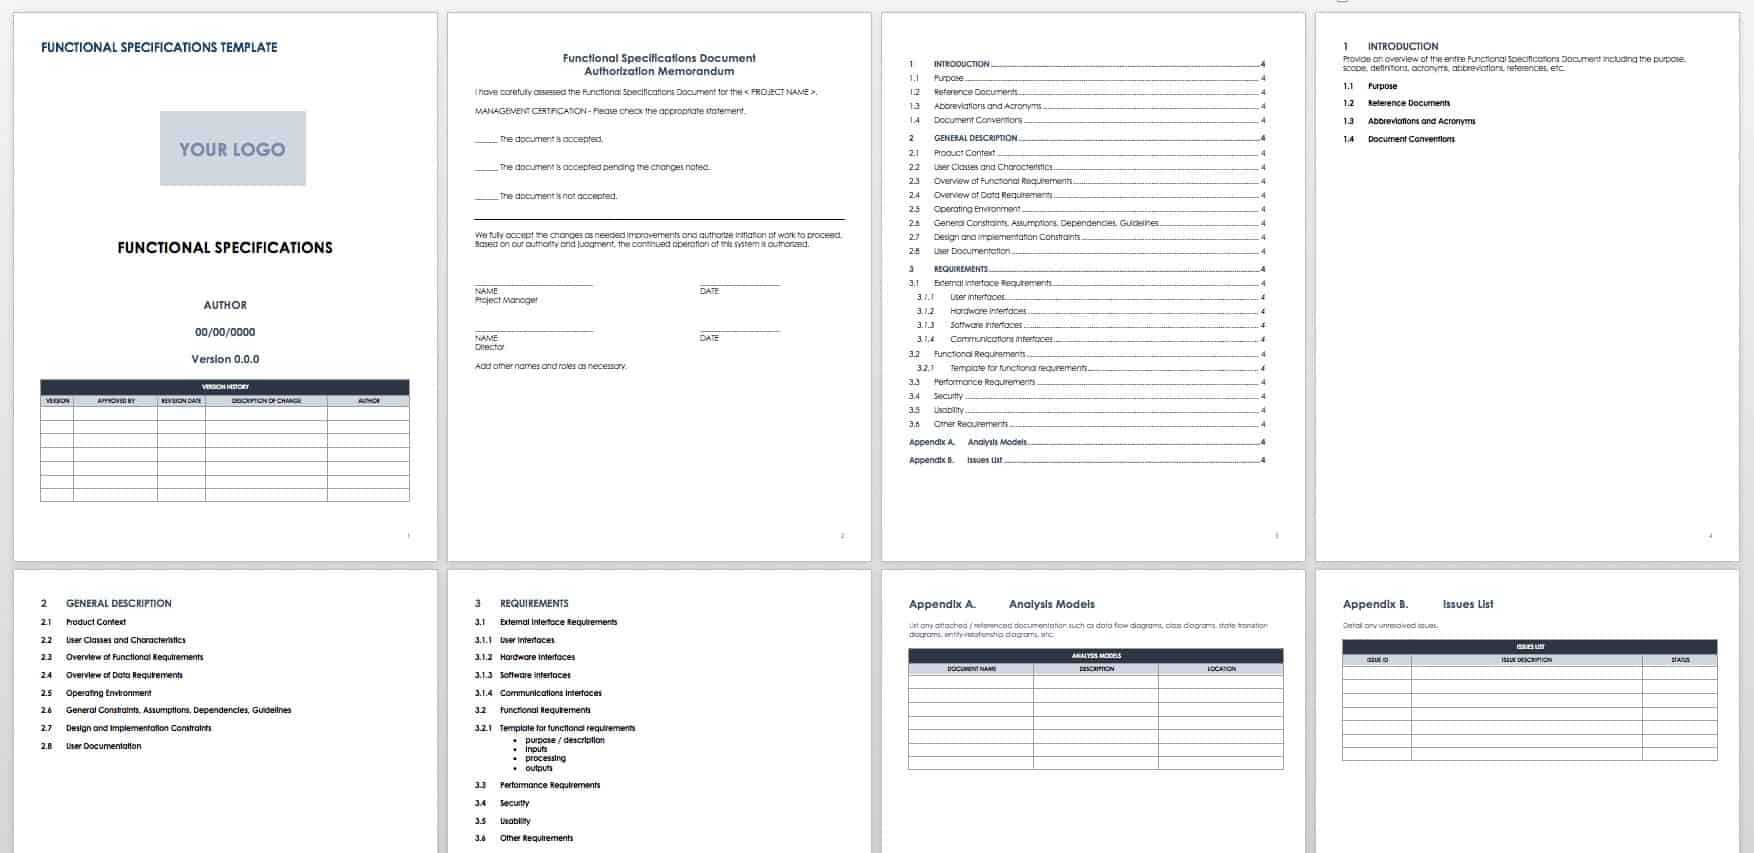 Free Functional Specification Templates | Smartsheet Within Product Requirements Document Template Word